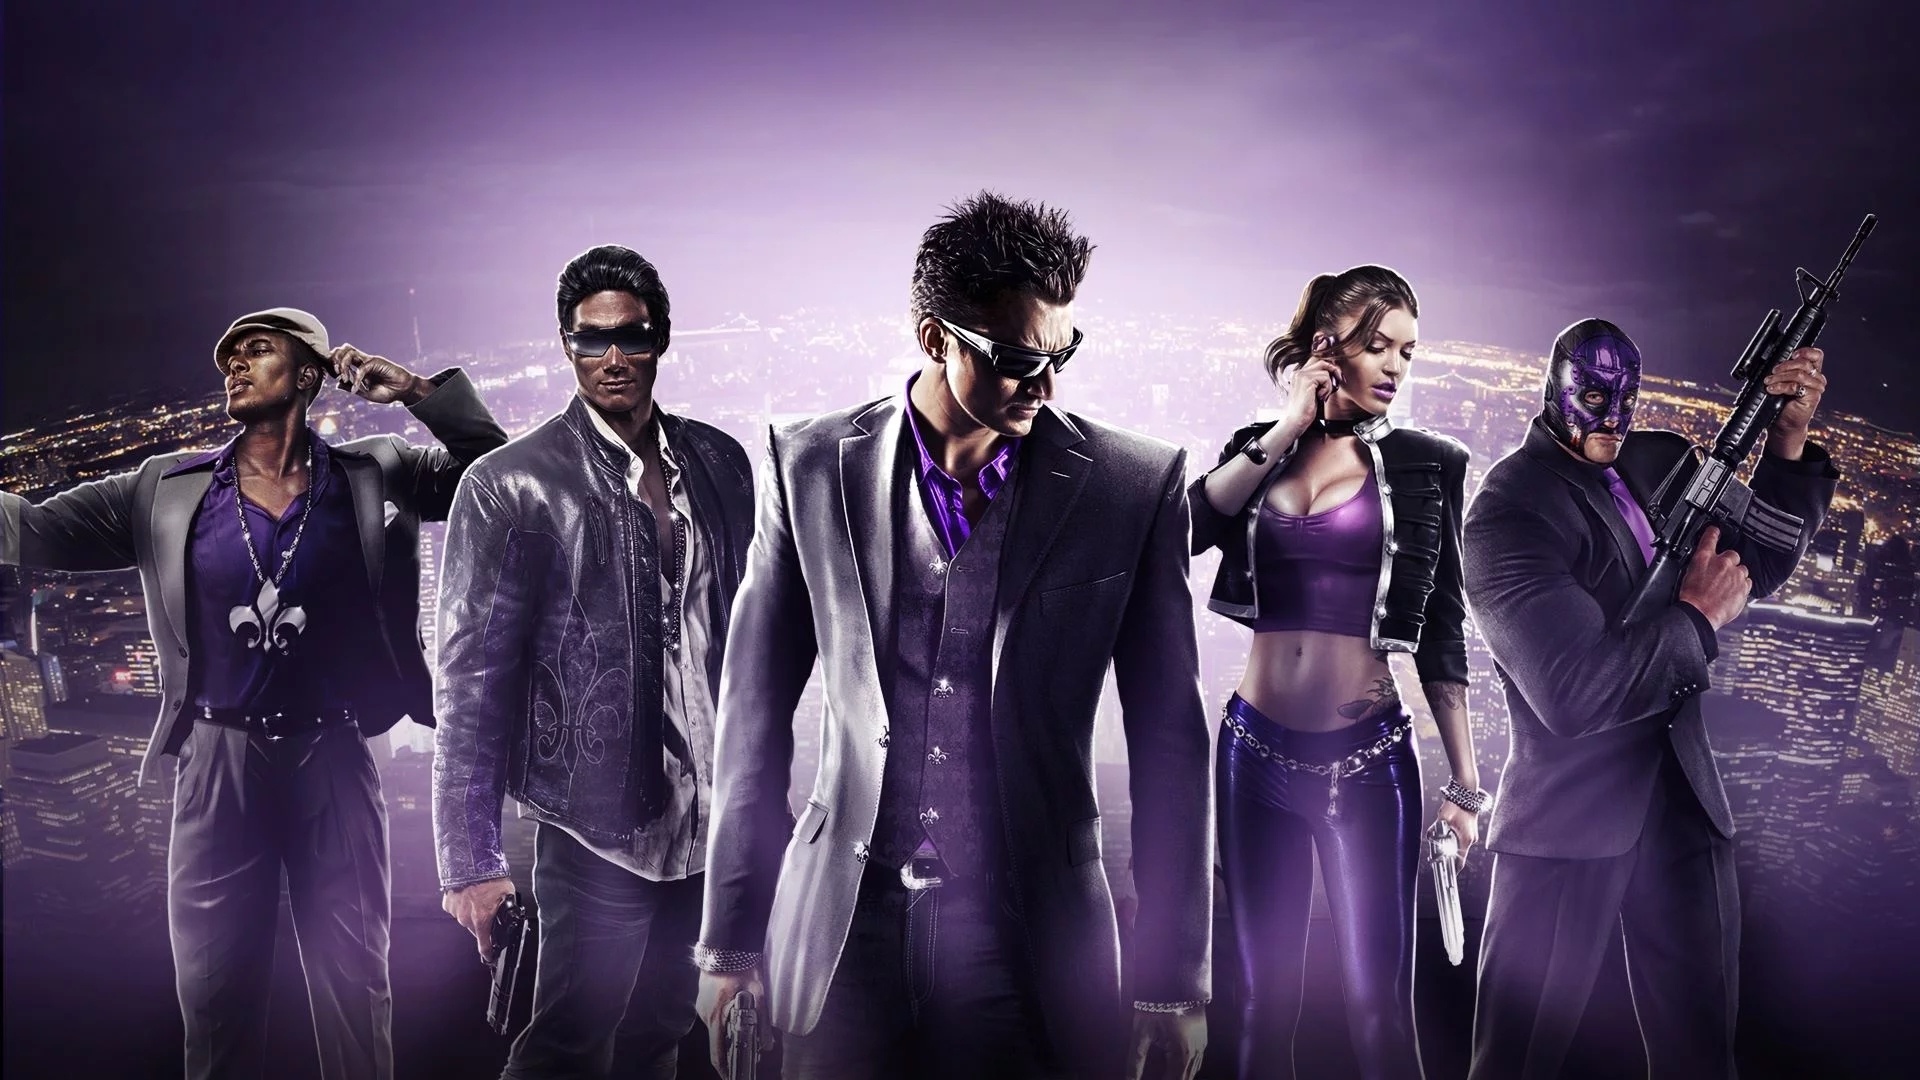 Saints Row: The Third – The Full Package Review